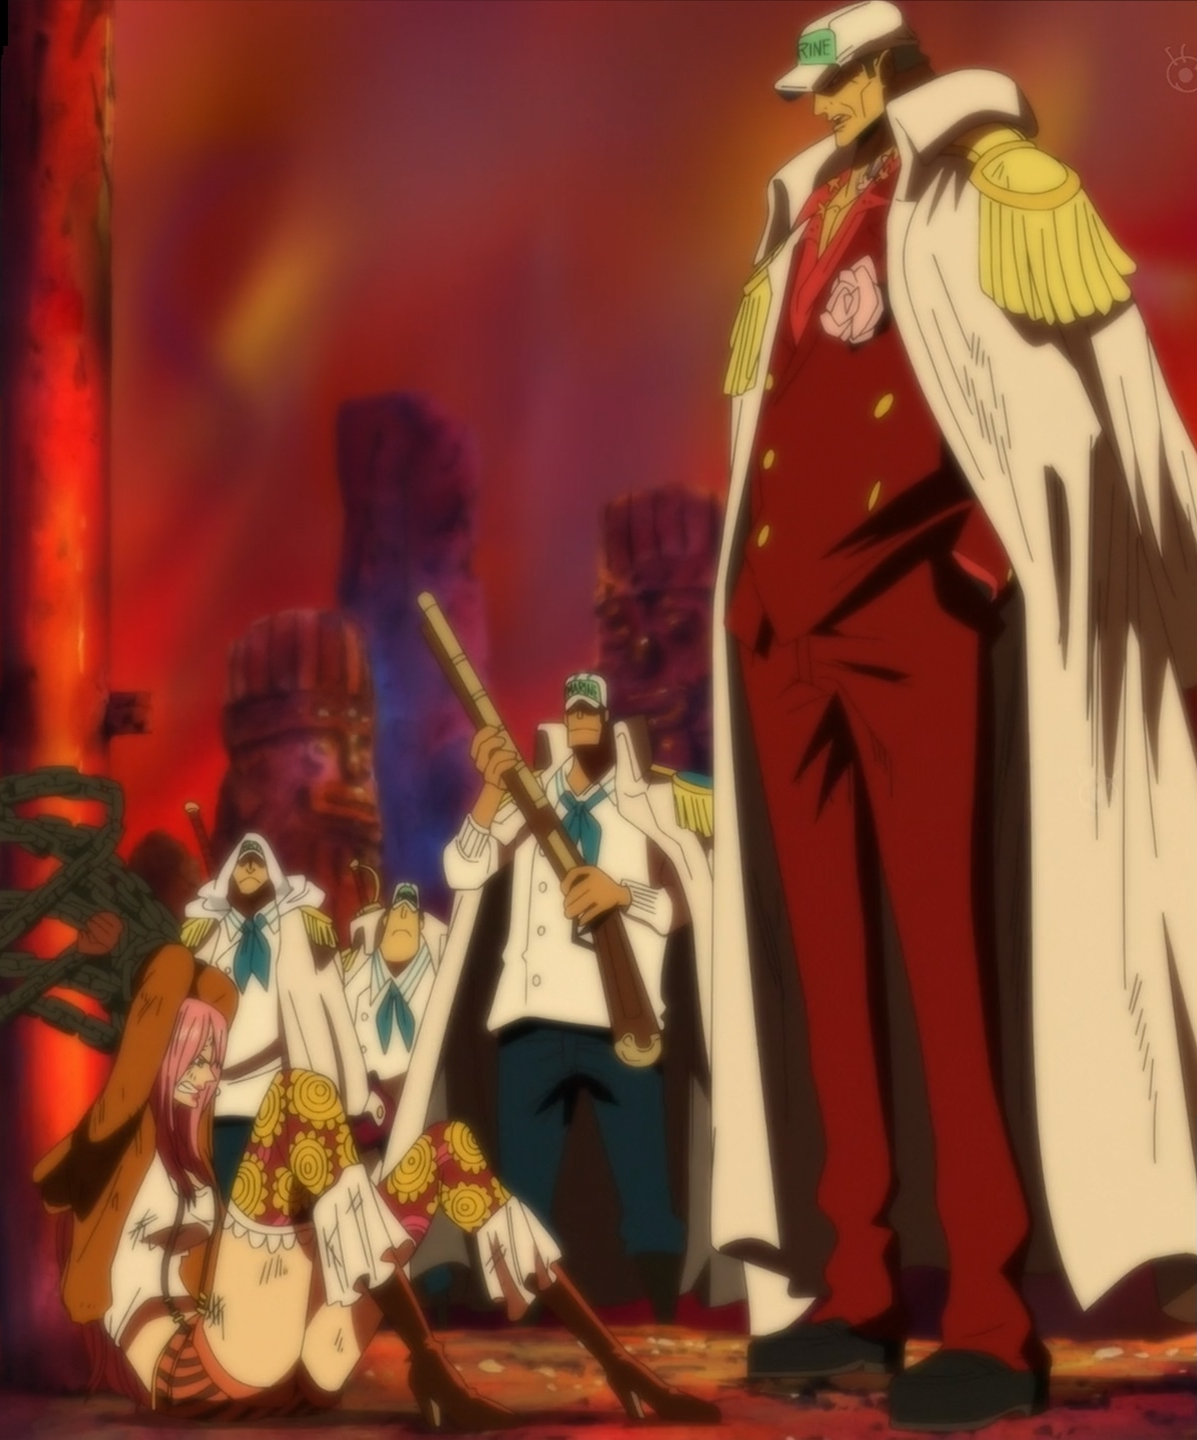 one piece marineford fanfiction